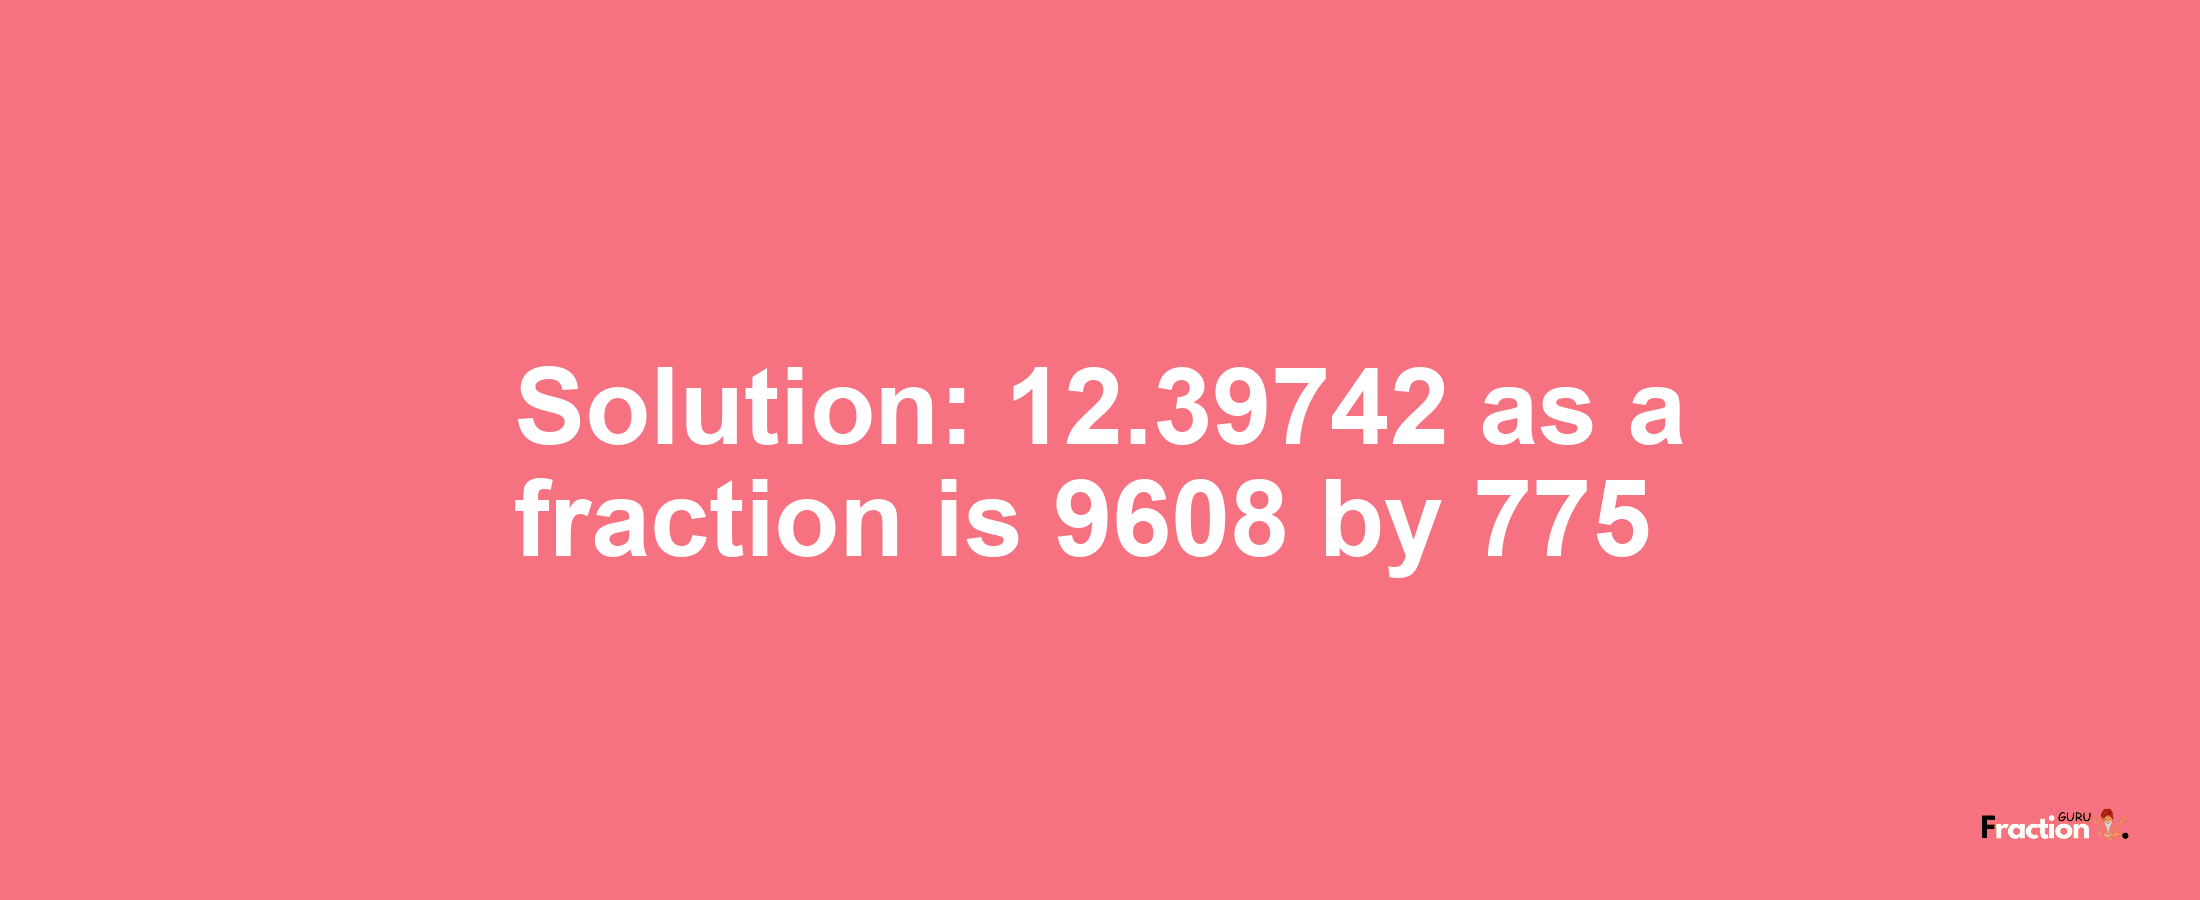 Solution:12.39742 as a fraction is 9608/775